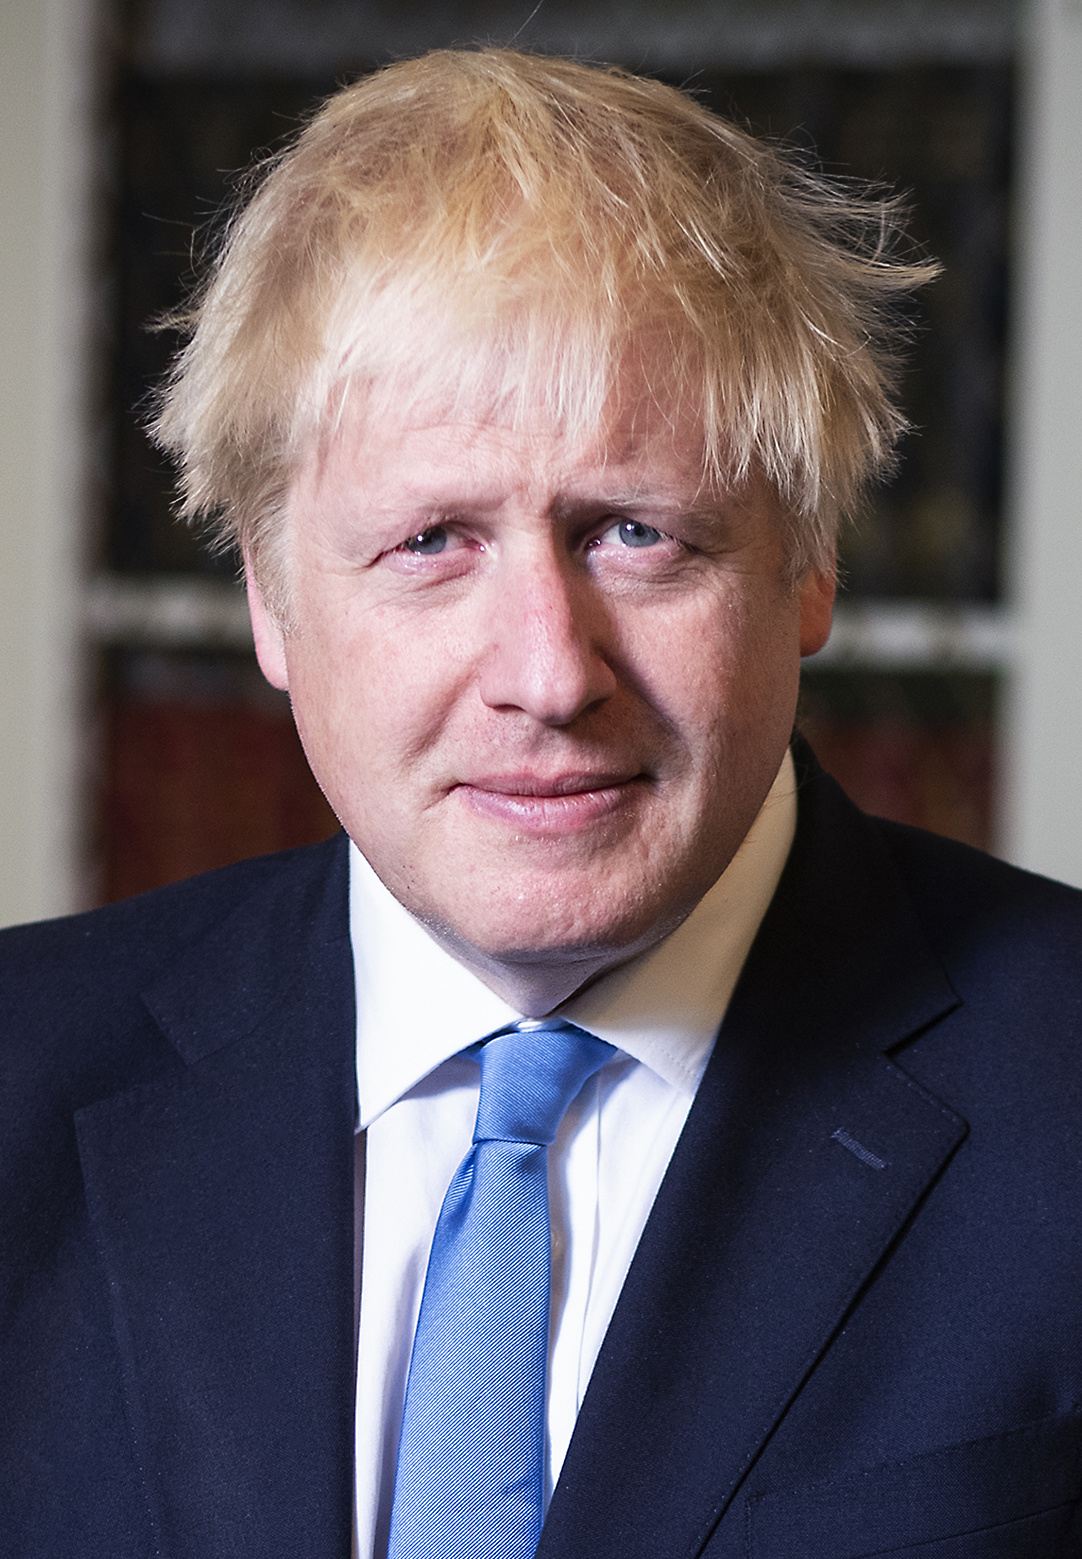 Boris Johnson is the third most famous person in the world in 2020, see why